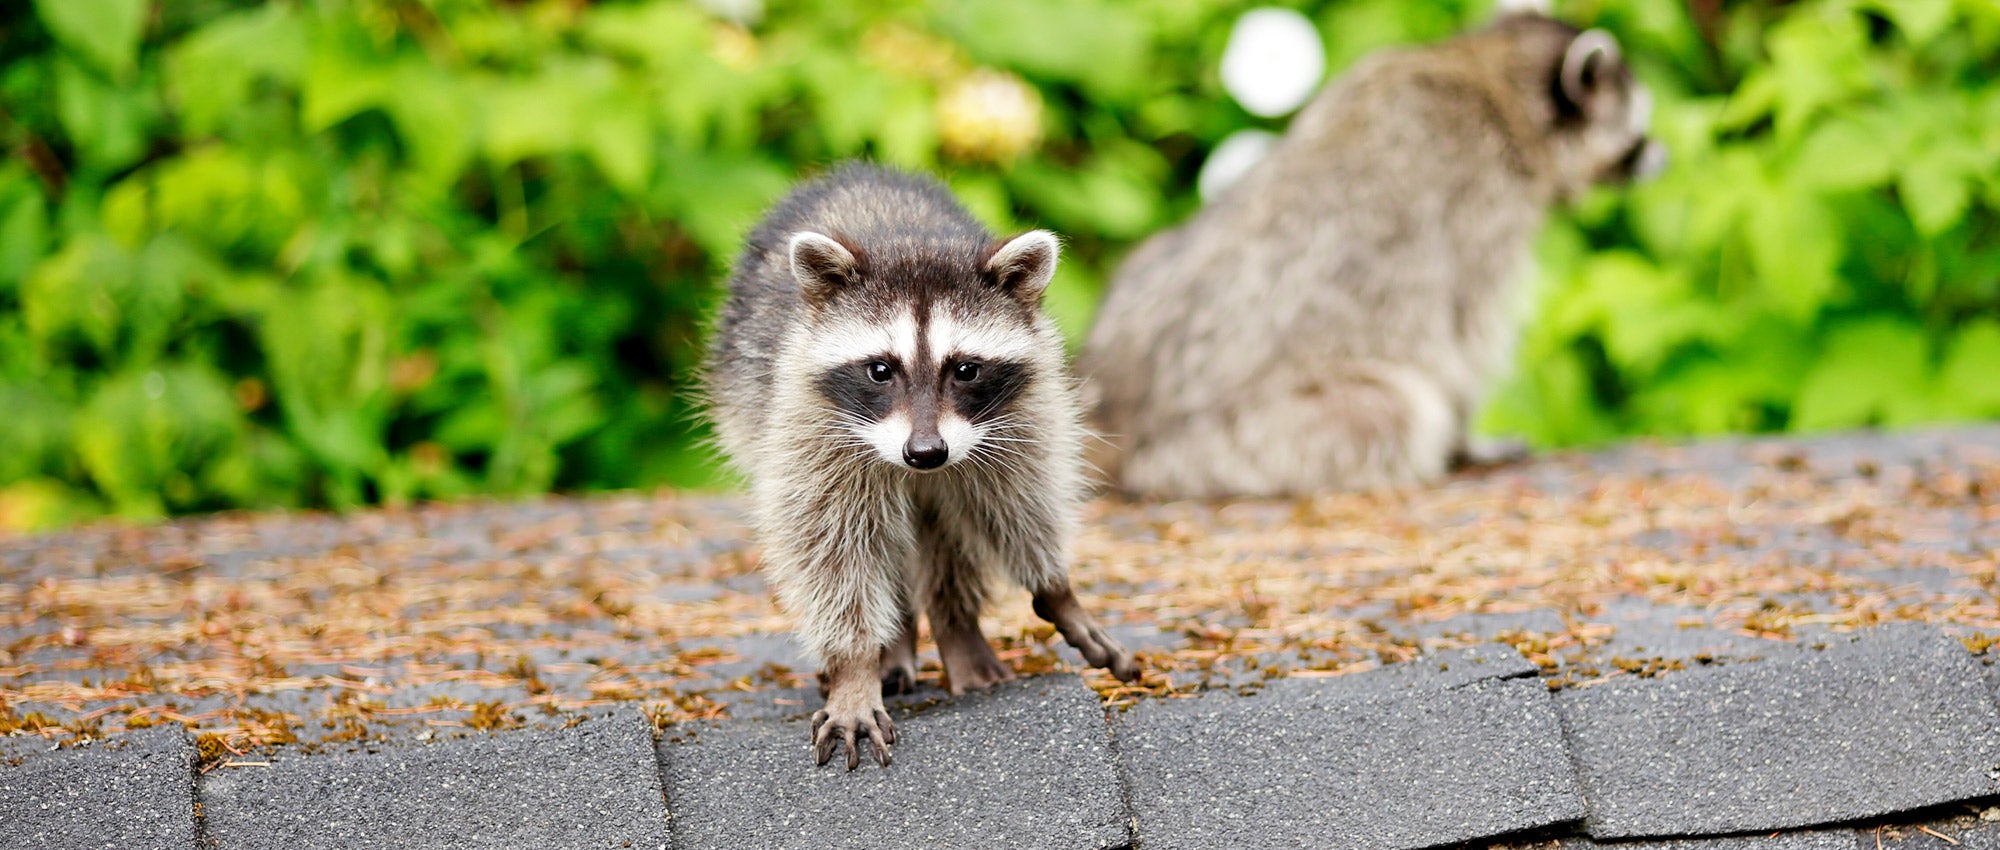 How to get rid of raccoons | The Humane Society of the United States